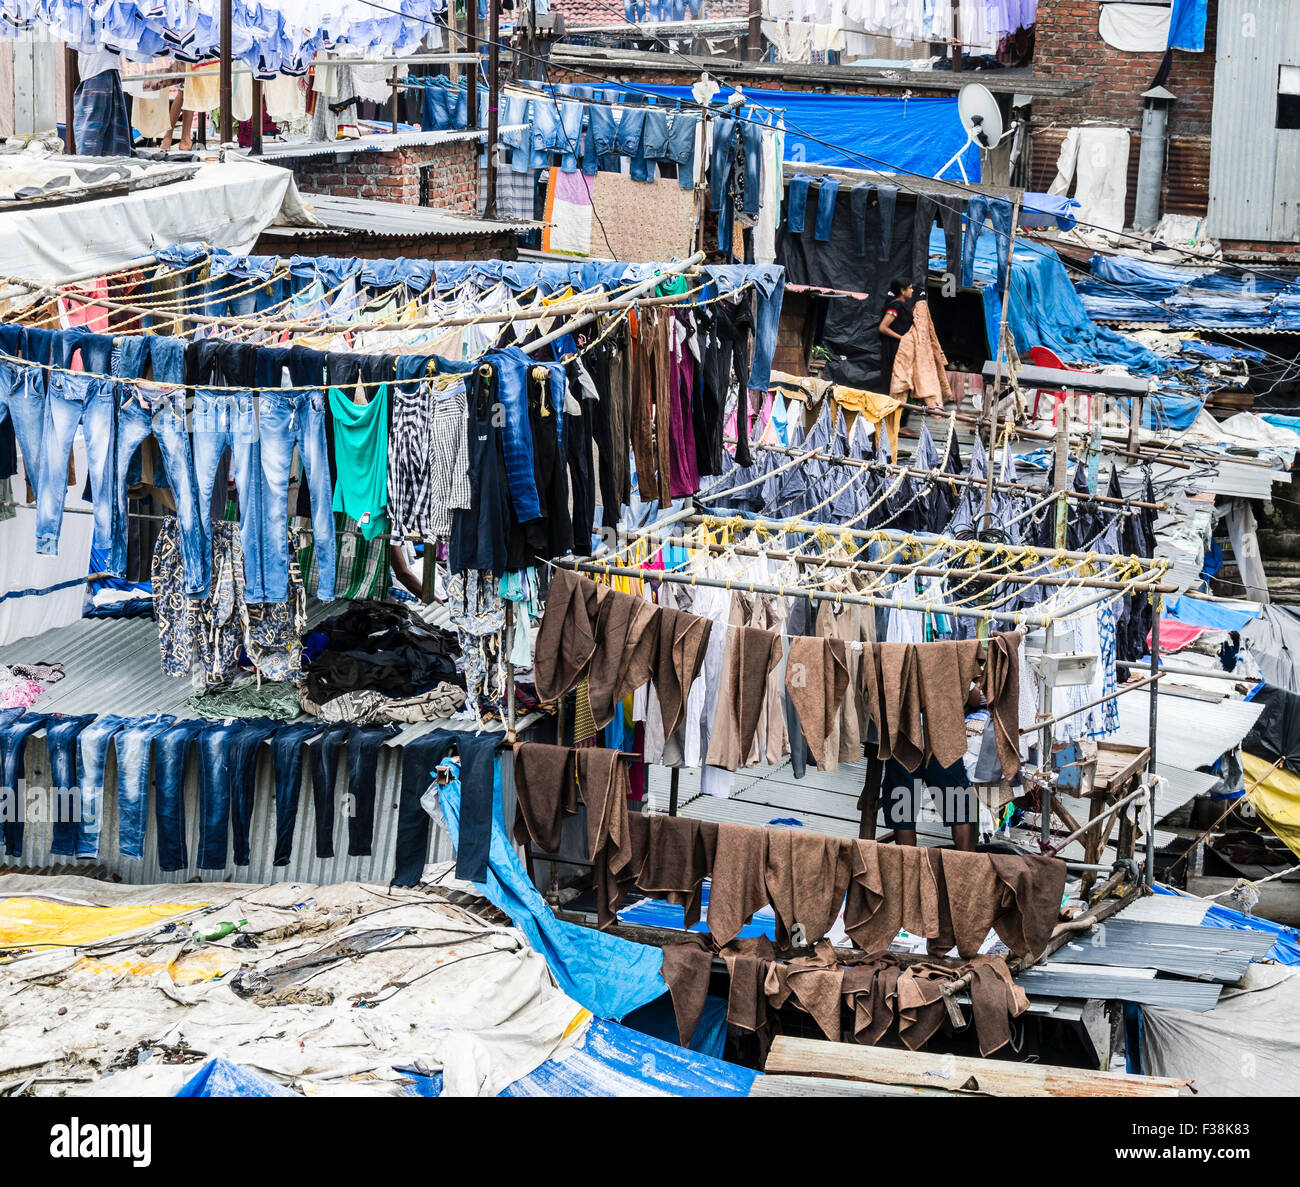 Dhobi Ghat, the world's largest outdoor laundry, clothes drying outside Mumbai, India Stock Photo